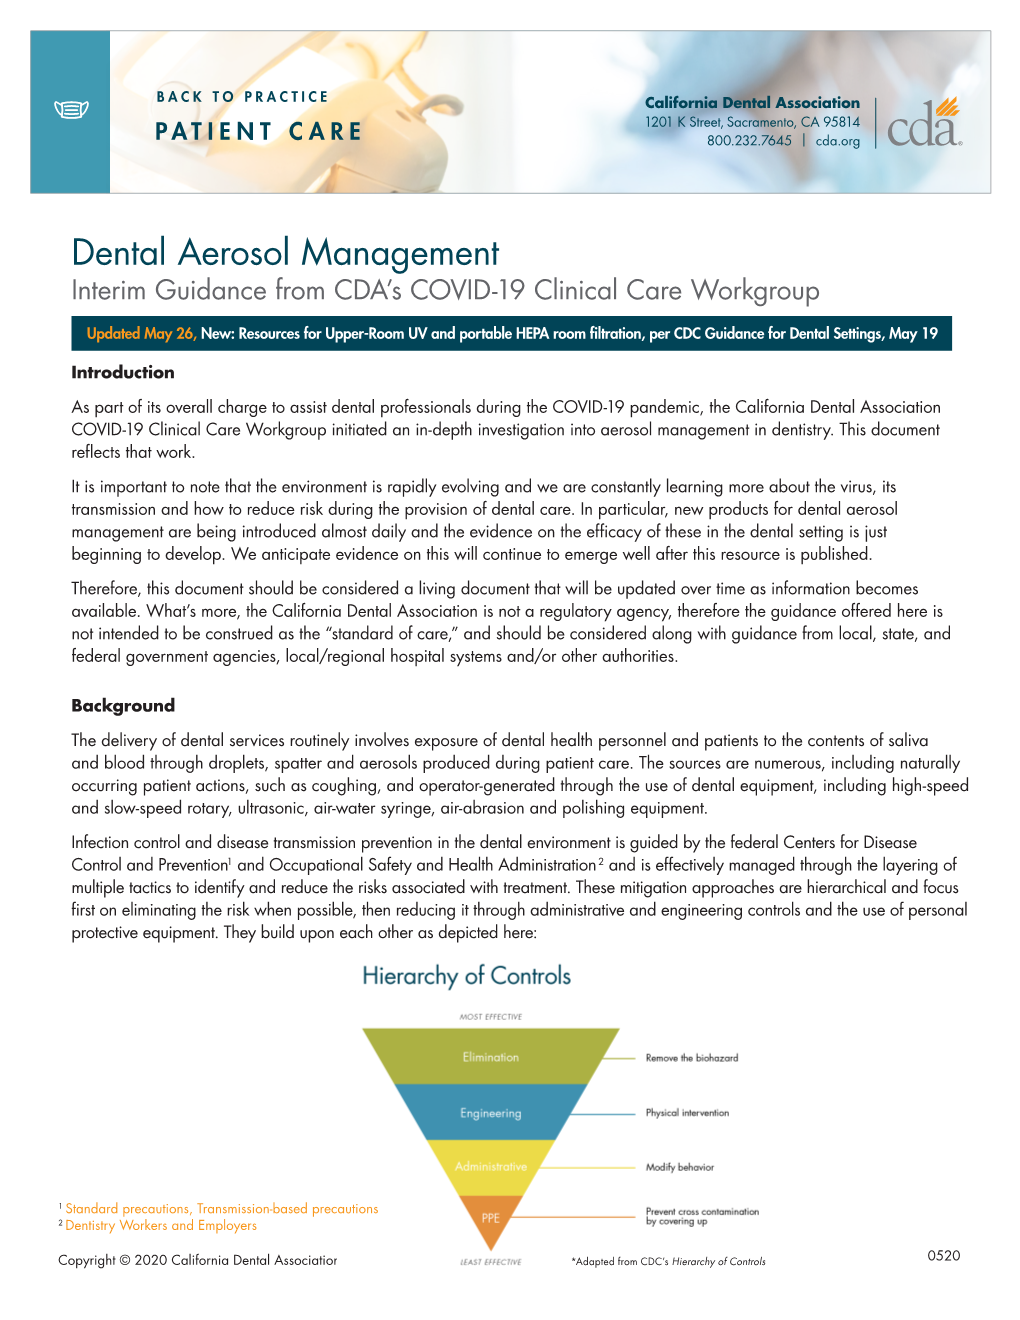 Dental Aerosol Management Interim Guidance from CDA’S COVID-19 Clinical Care Workgroup